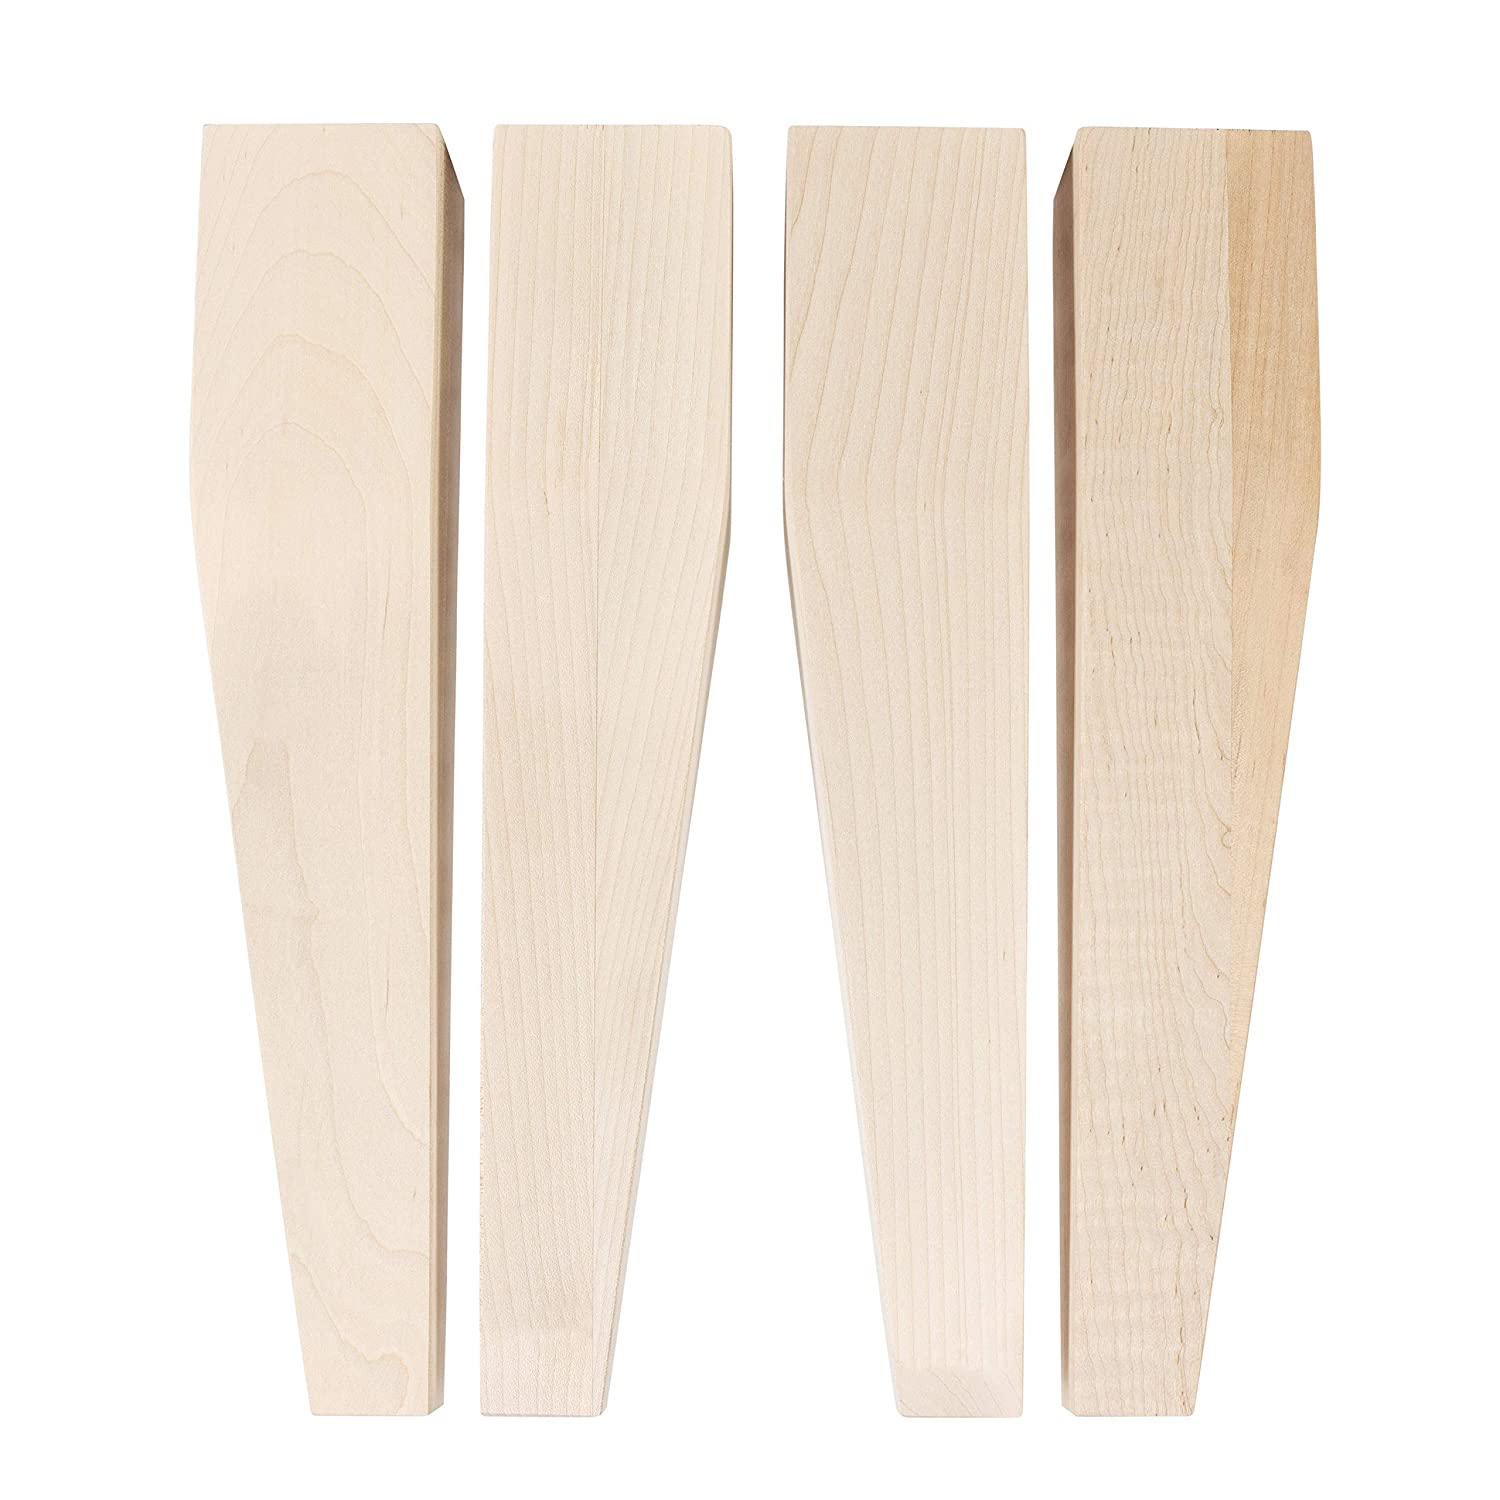 Maple Tapered Bench Legs- 3" x 16" by Carolina Leg Co